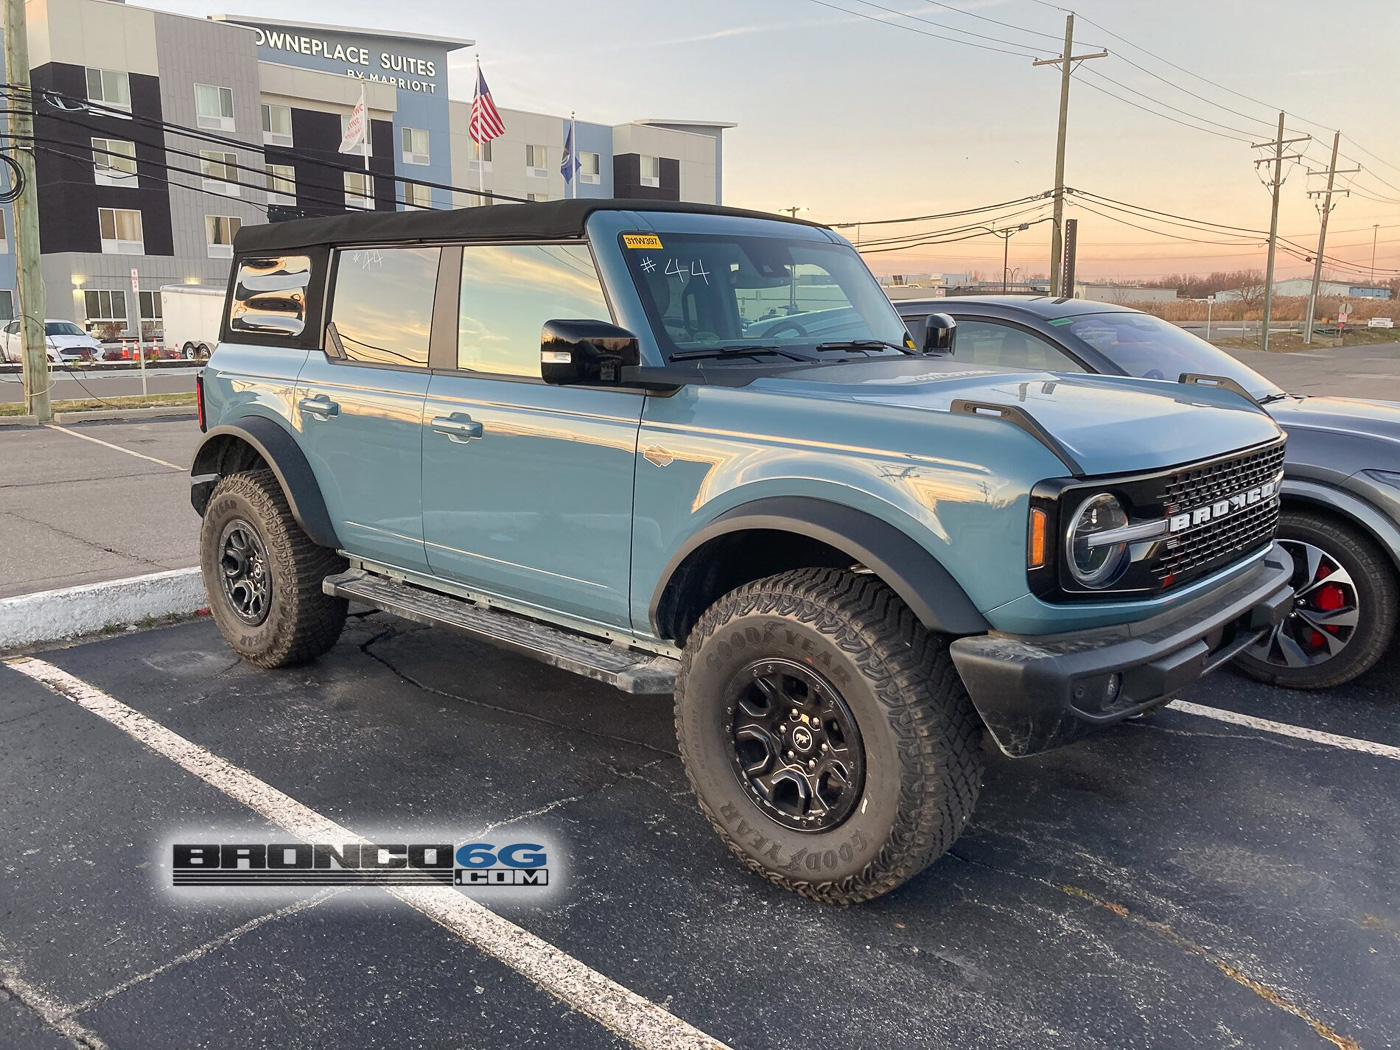 Ford Bronco 4 Door Sasquatch Picture Thread (No CGI, only real pics) C3CFE763-5D1C-4949-BFD7-2986ACC05B0F